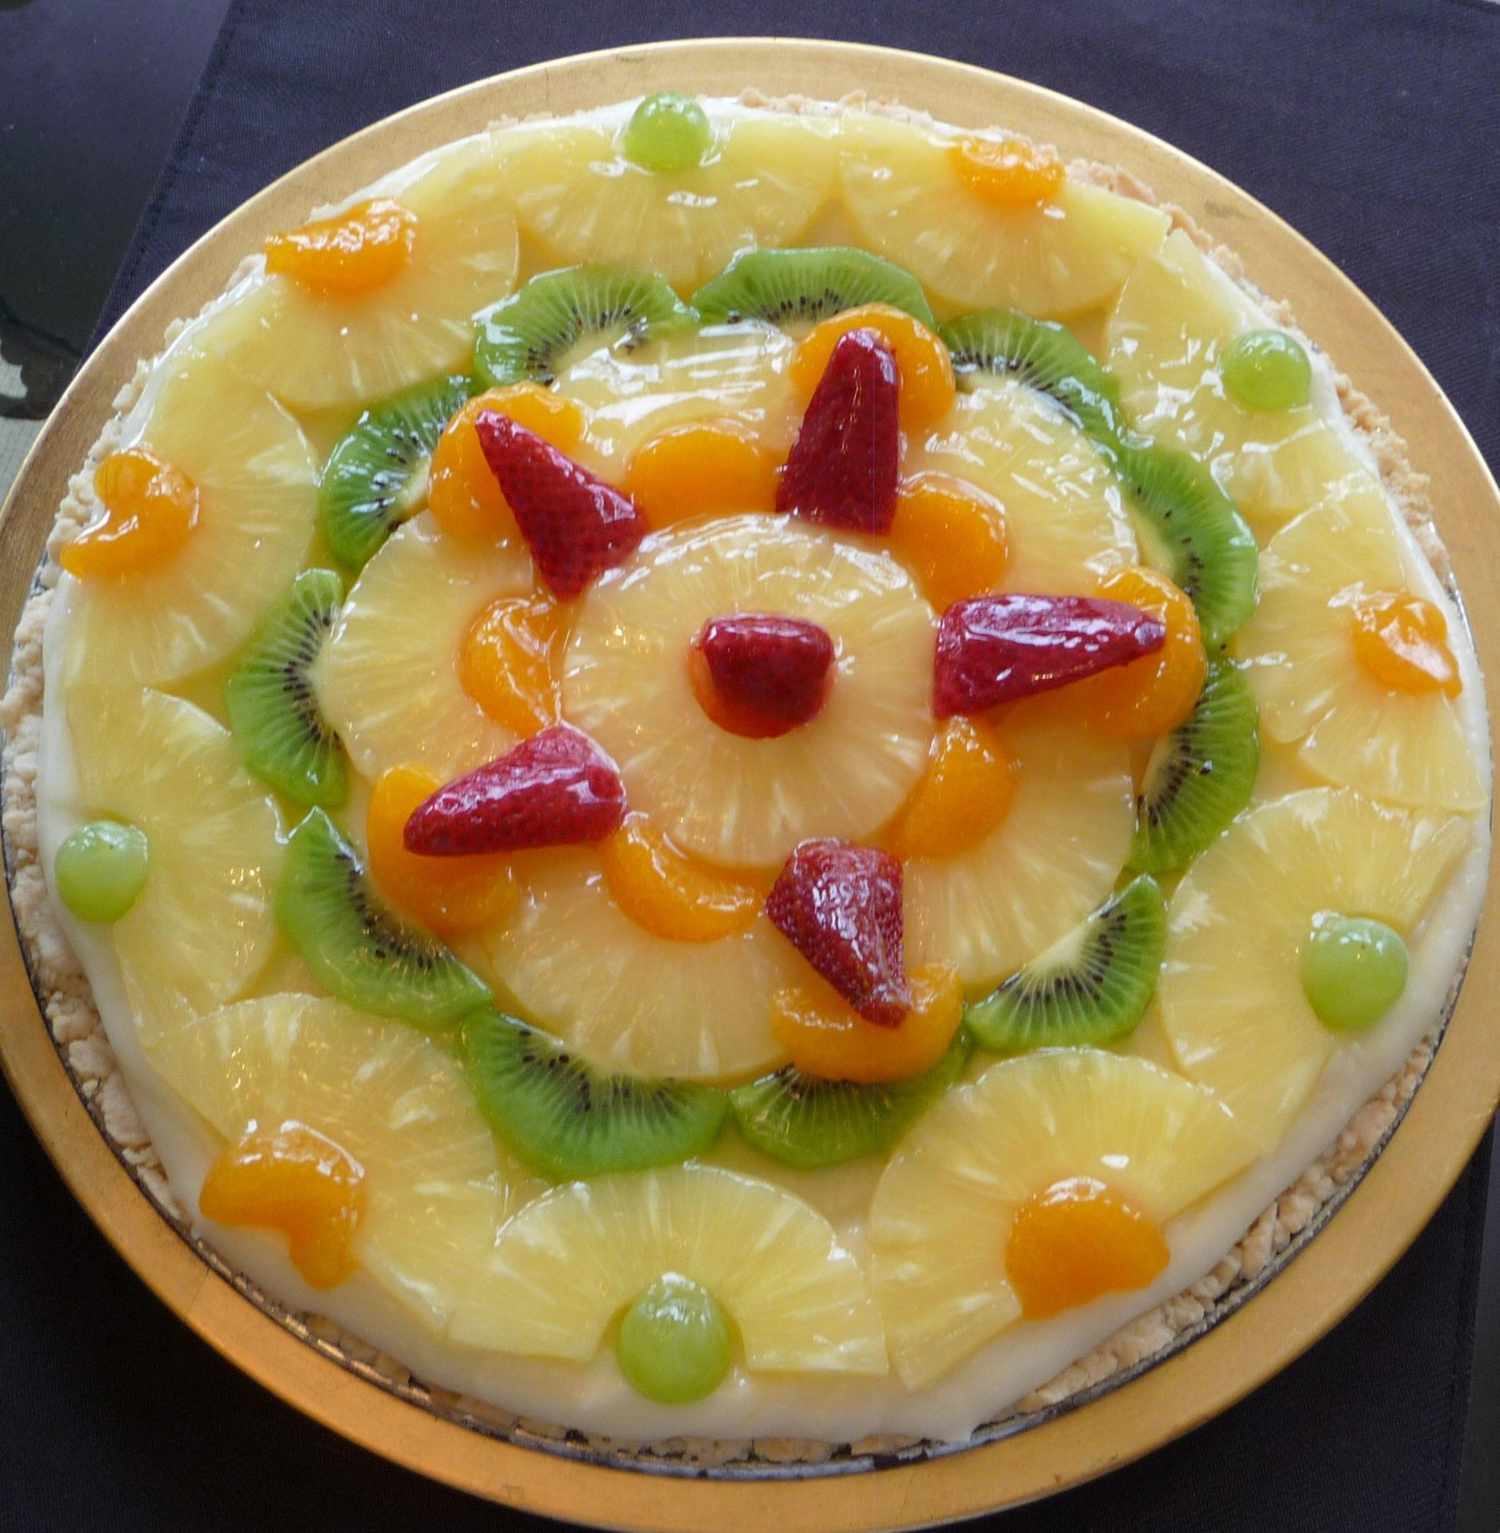 Fruit Pizza With White Chocolate by elnor3